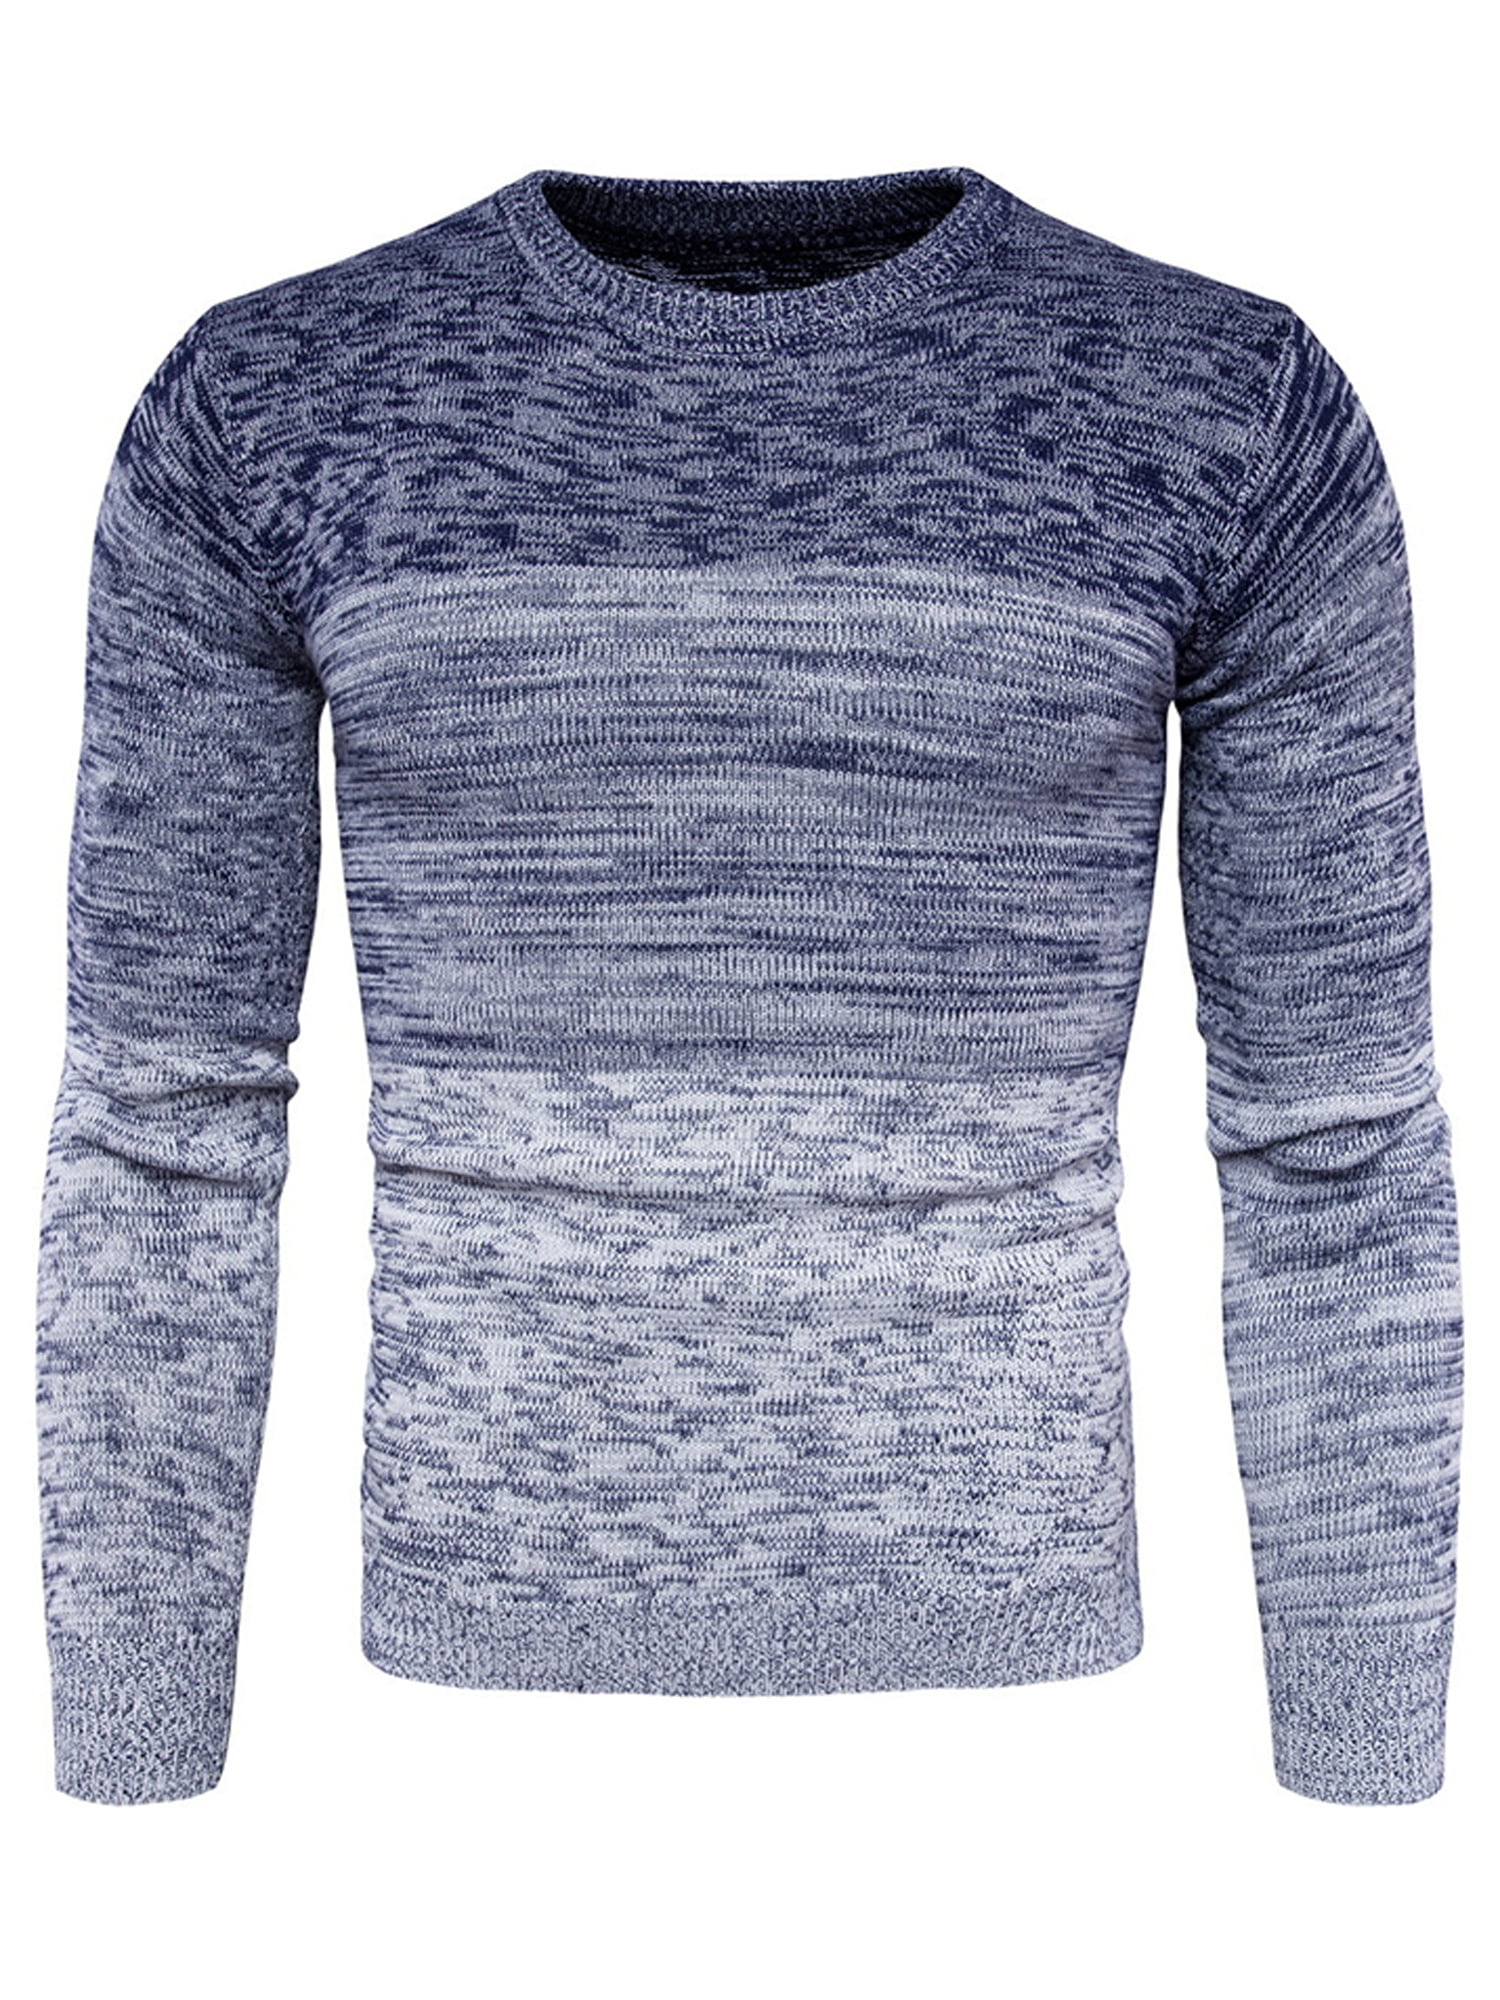 Winter Mens Knit Pullover Long Sleeve Jumper Casual Slim Crew Neck Sweater Tops